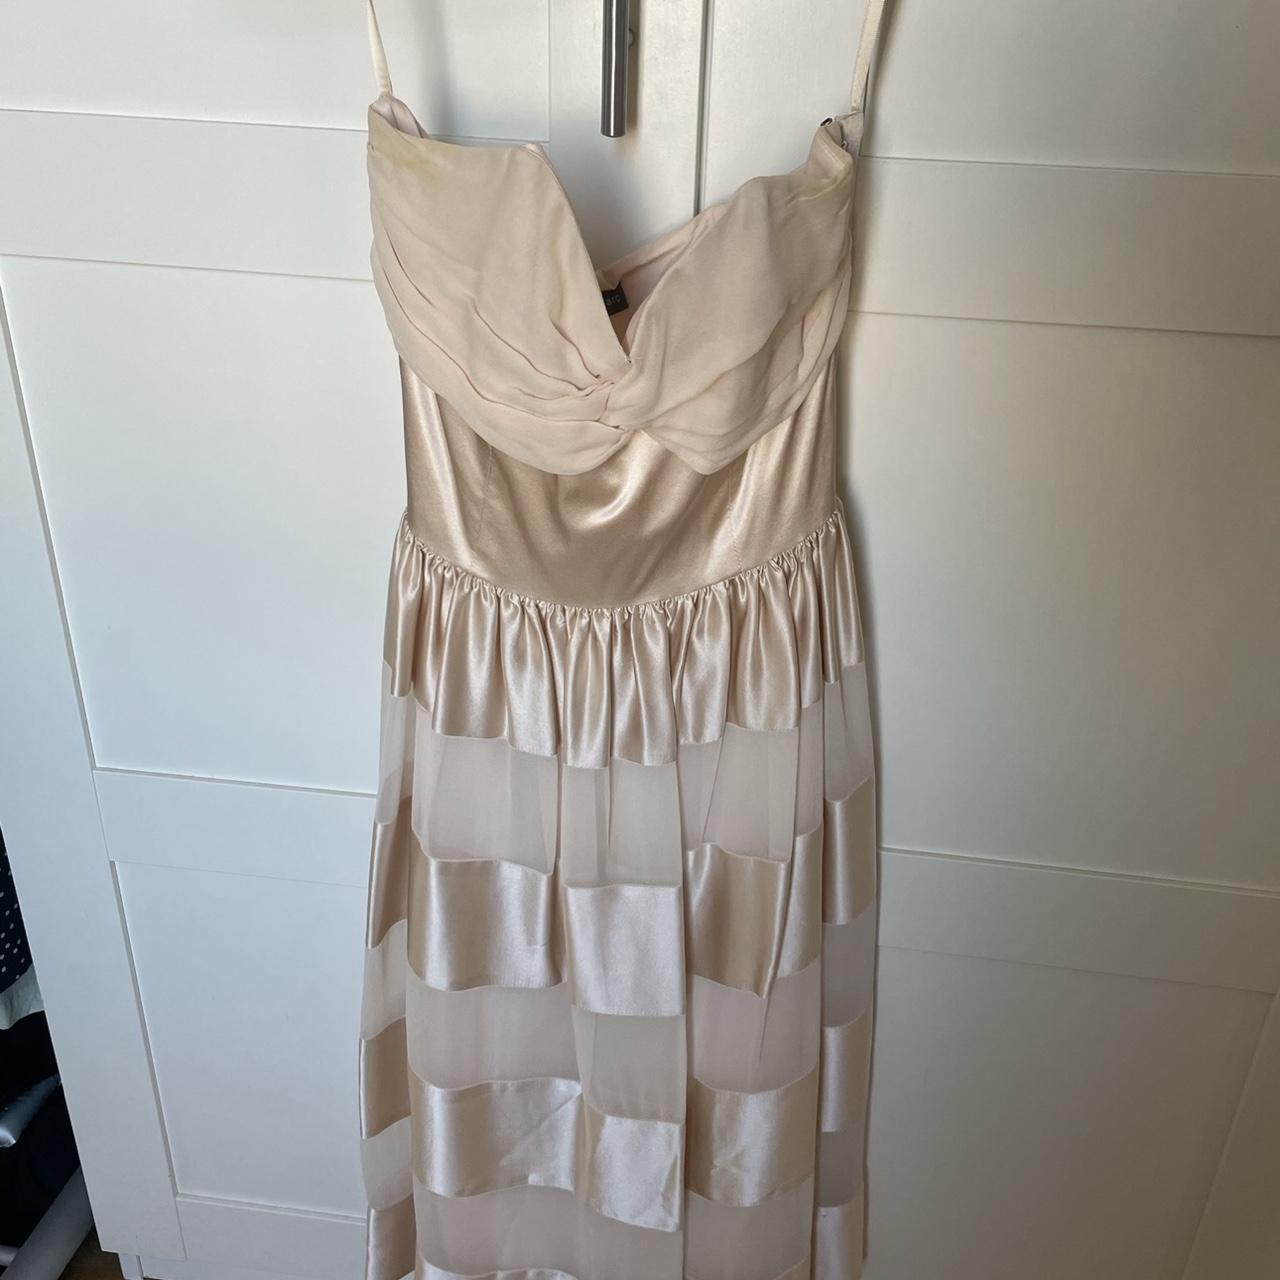 Camilla & Marc cocktail dress. Some staining under arms - Depop